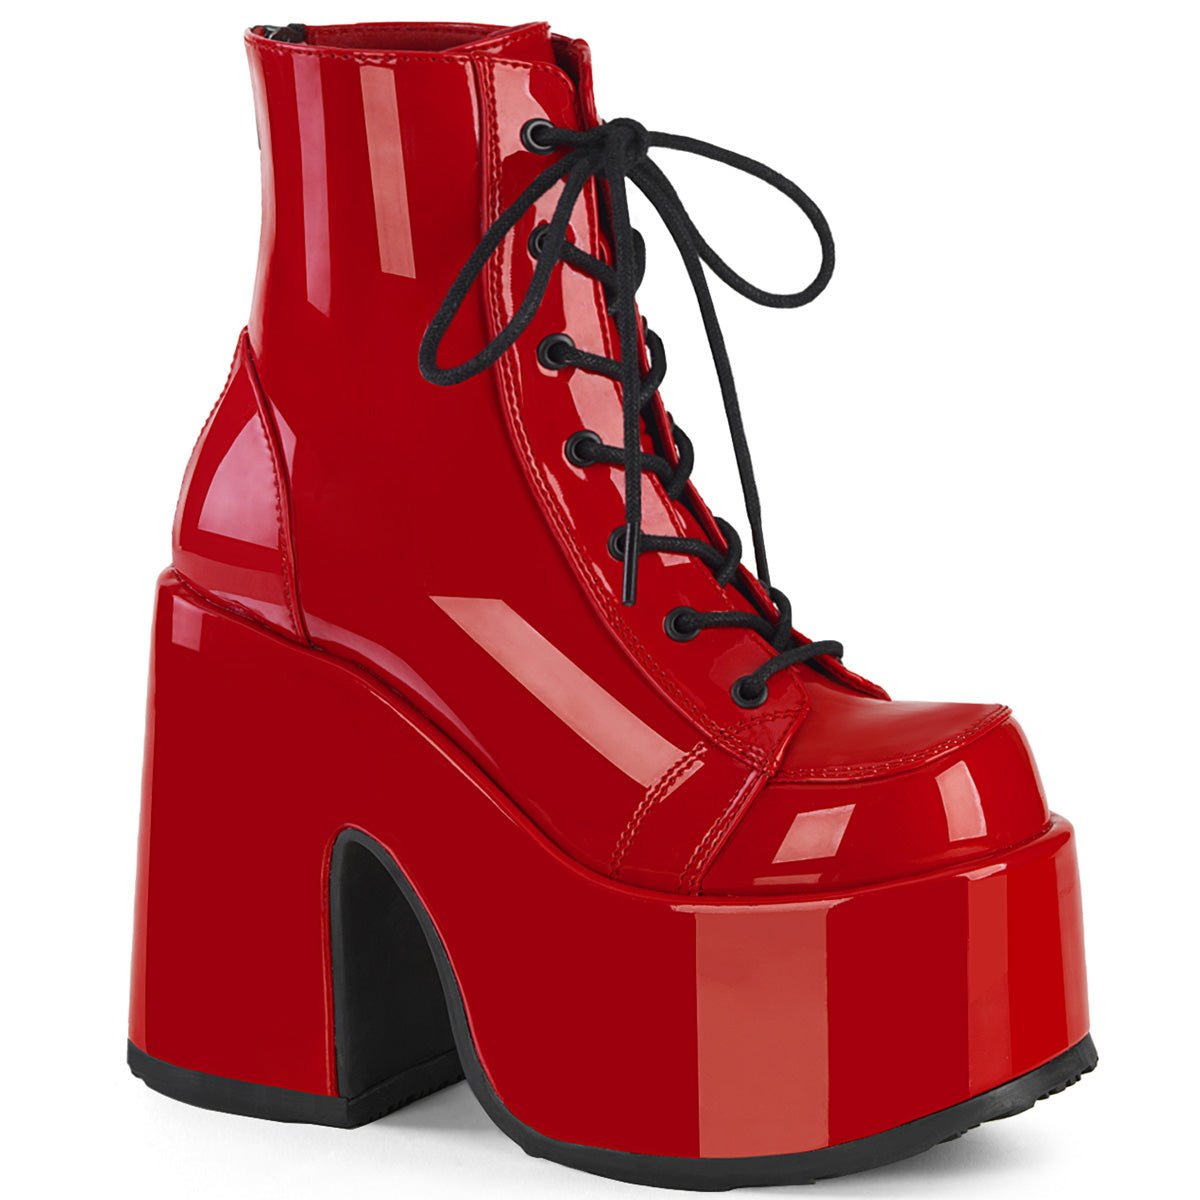 Too Fast | Demonia Camel 203 | Red Patent Leather Women's Ankle Boots